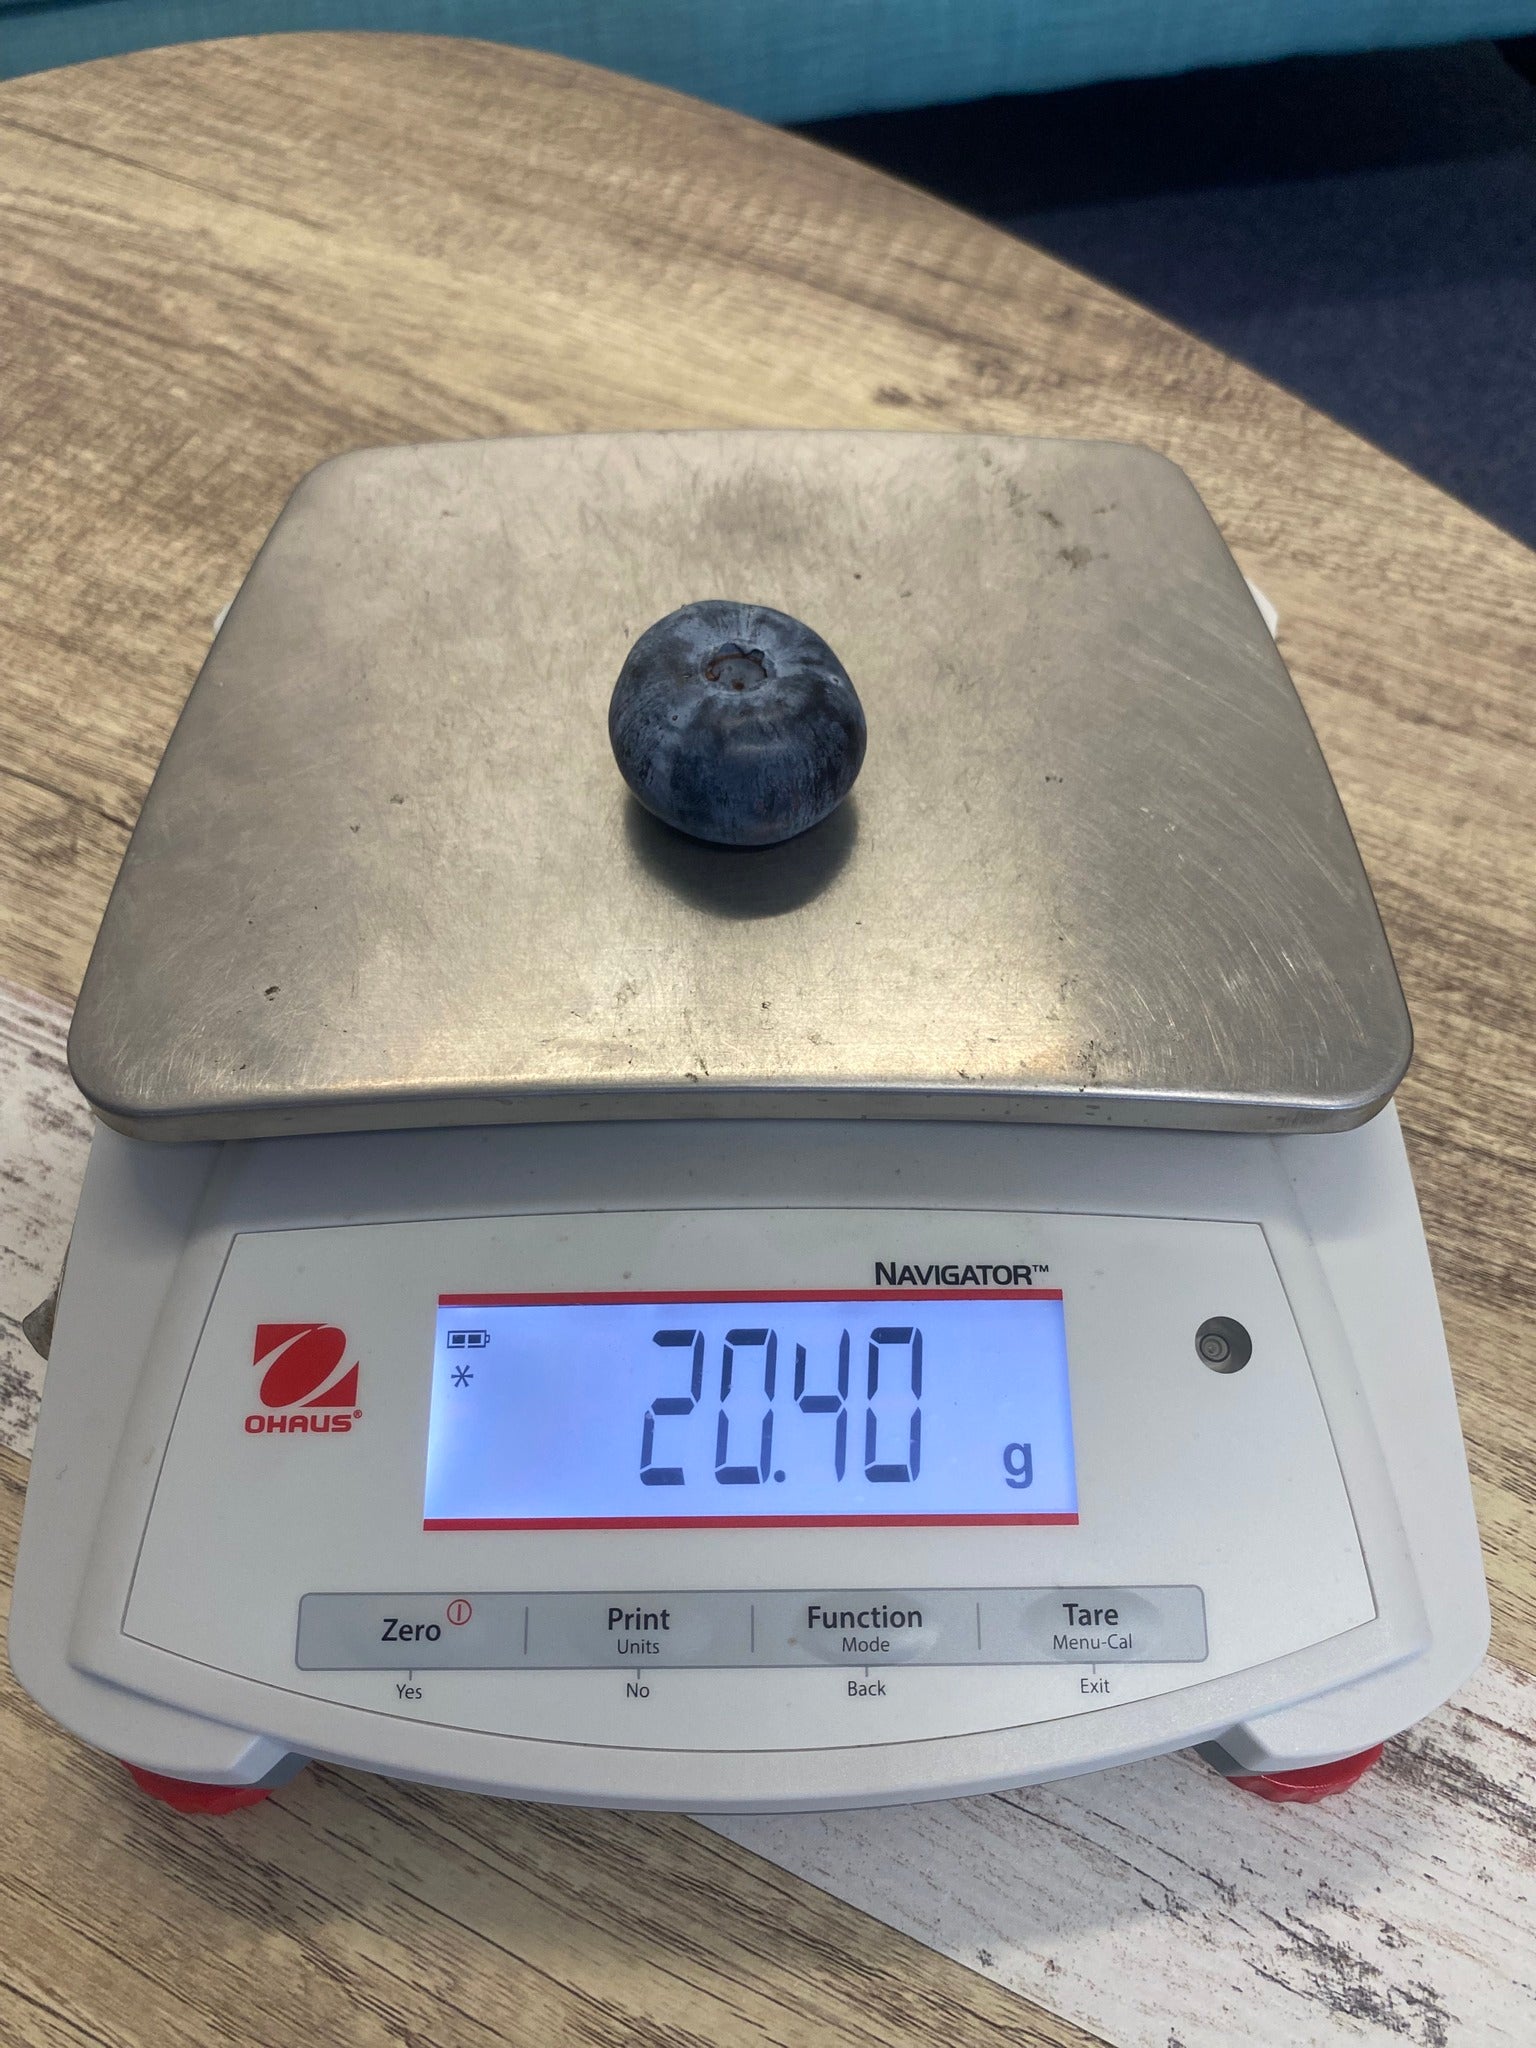 The blueberry, weighing 20.4 grams and is 39.31mm wide